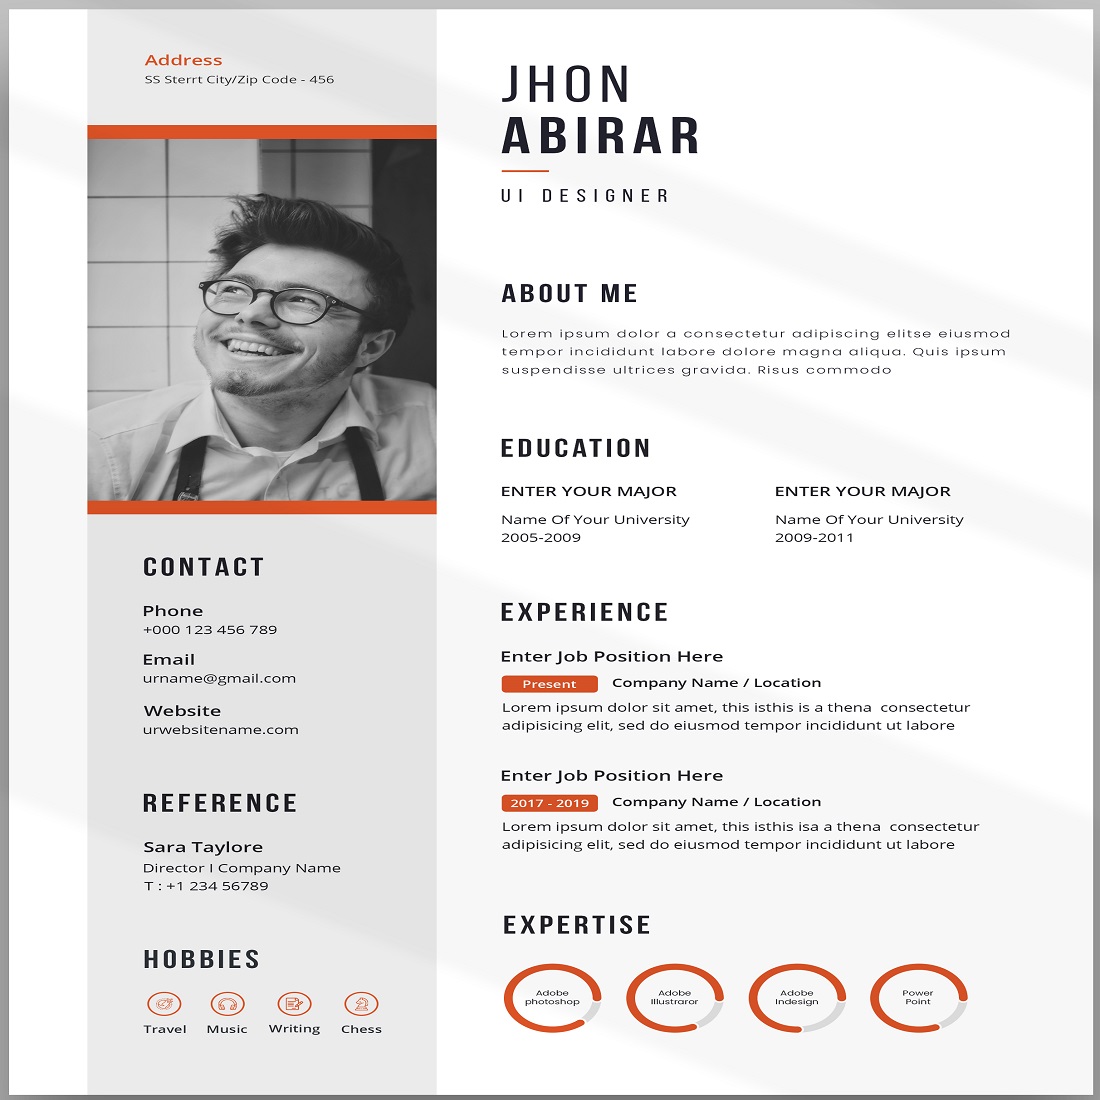 Resume OF CV, Adobe Photoshop - main image preview.